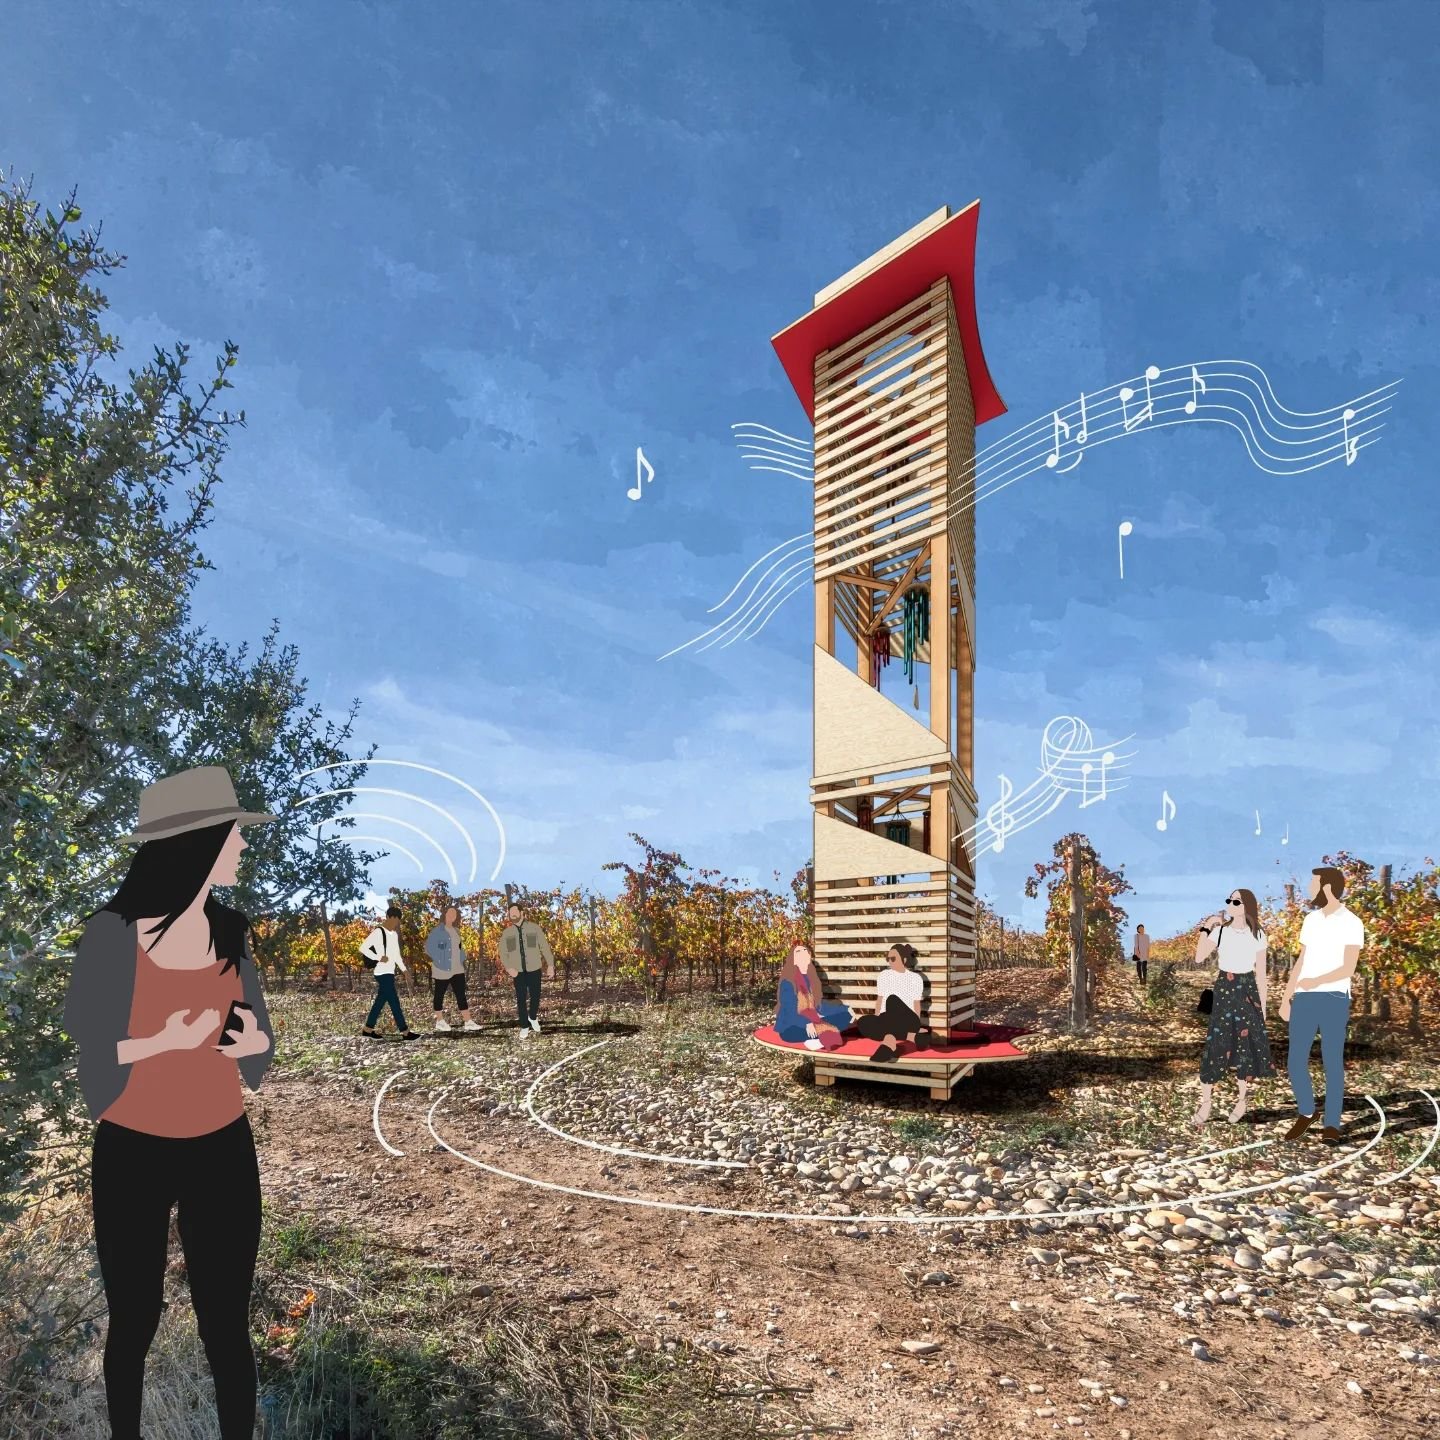 At its best, architecture is a multisensory experience. &quot;Campanario del Campo&quot; envisions a lightweight bell tower strung with oversized wind chimes, constructed as a whimsical marker in the heart of Rioja's majestic vineyards. The chimes ri